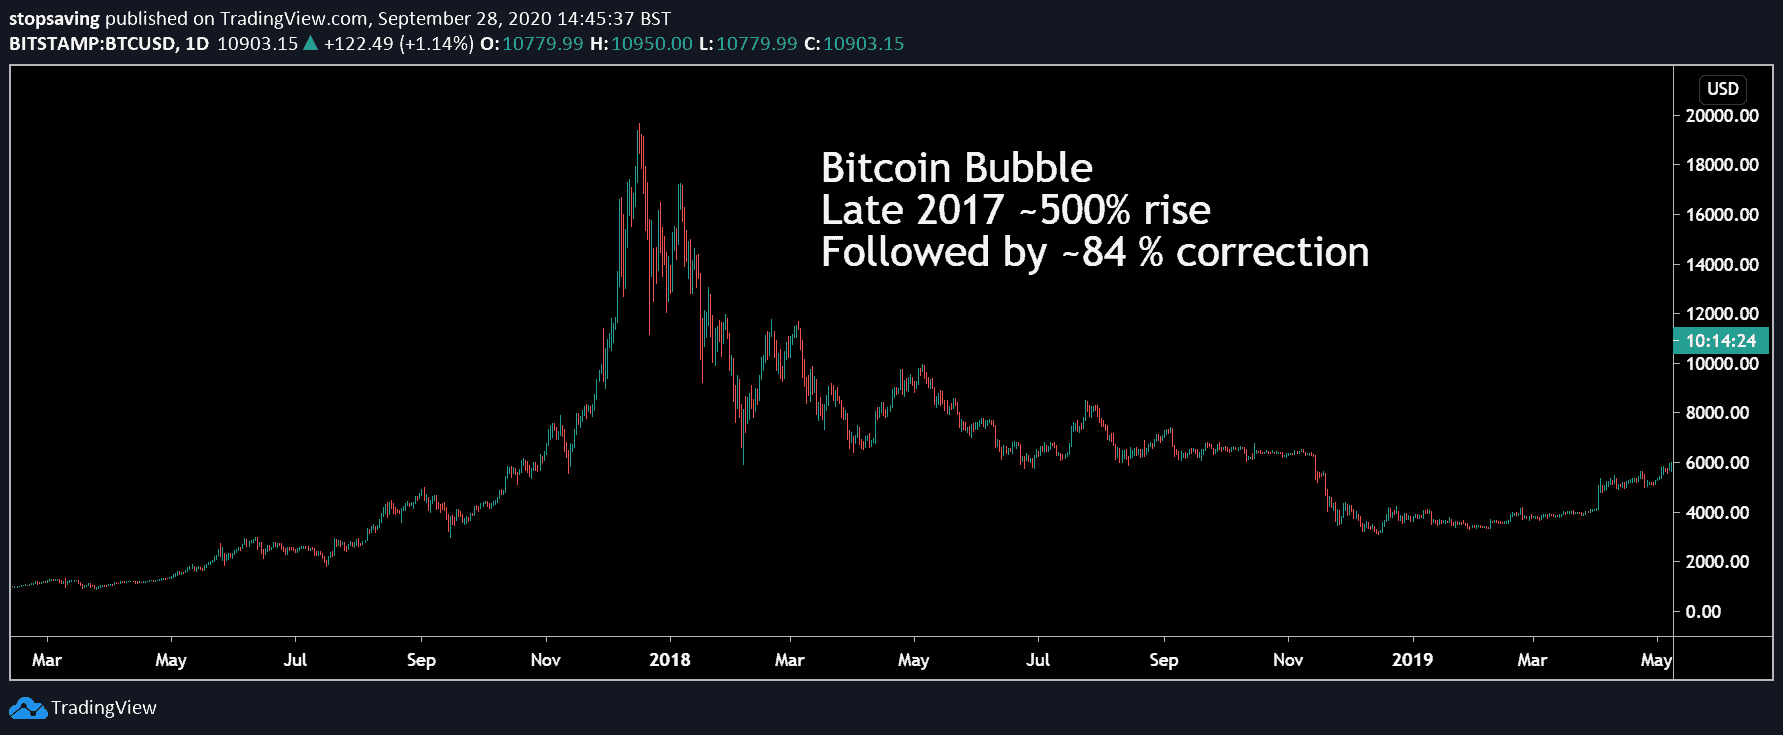 chart showing bitcoin bubble of 2017